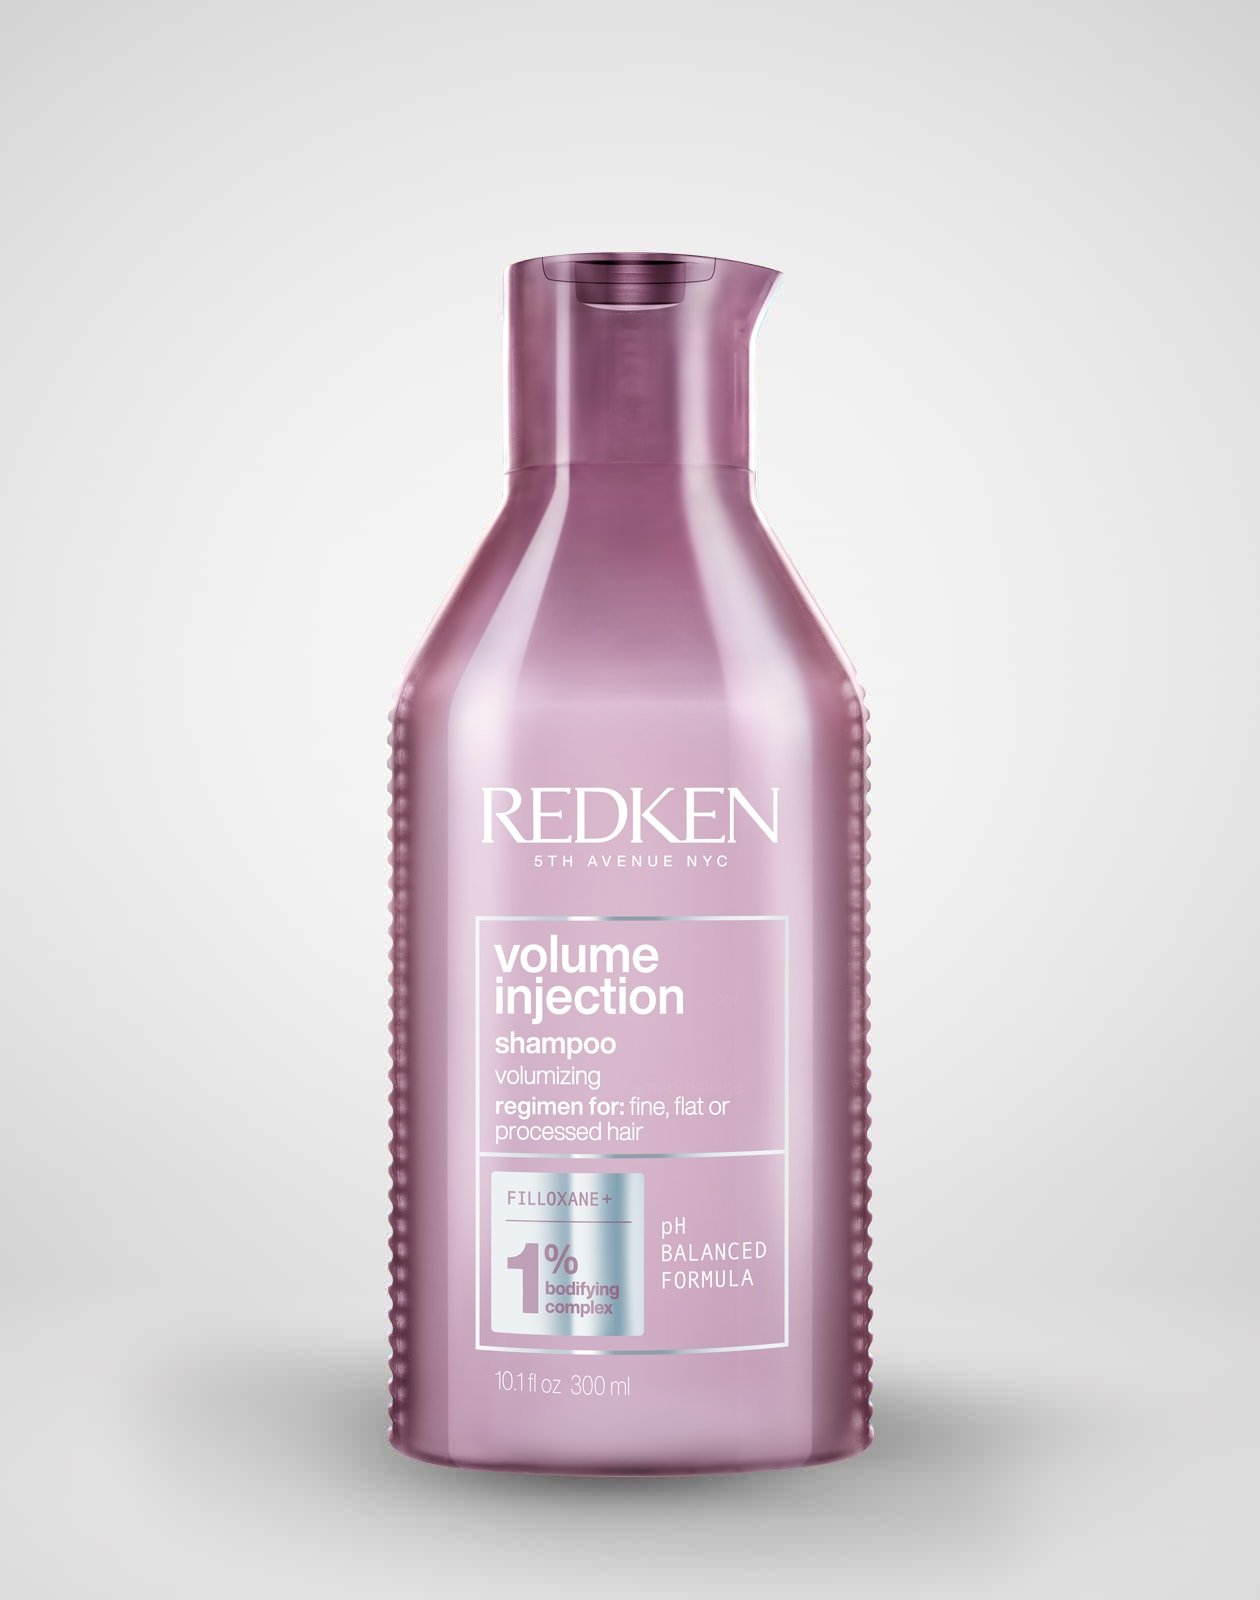 https://www.redken.ca/-/media/project/loreal/brand-sites/redken/americas/ca/product-information/product-images/imported-product-images/volume-injection/redken-volumeinjection-shampoo-1260x1600.jpeg?rev=98ce102676cb4a5faa2a4bb683222275